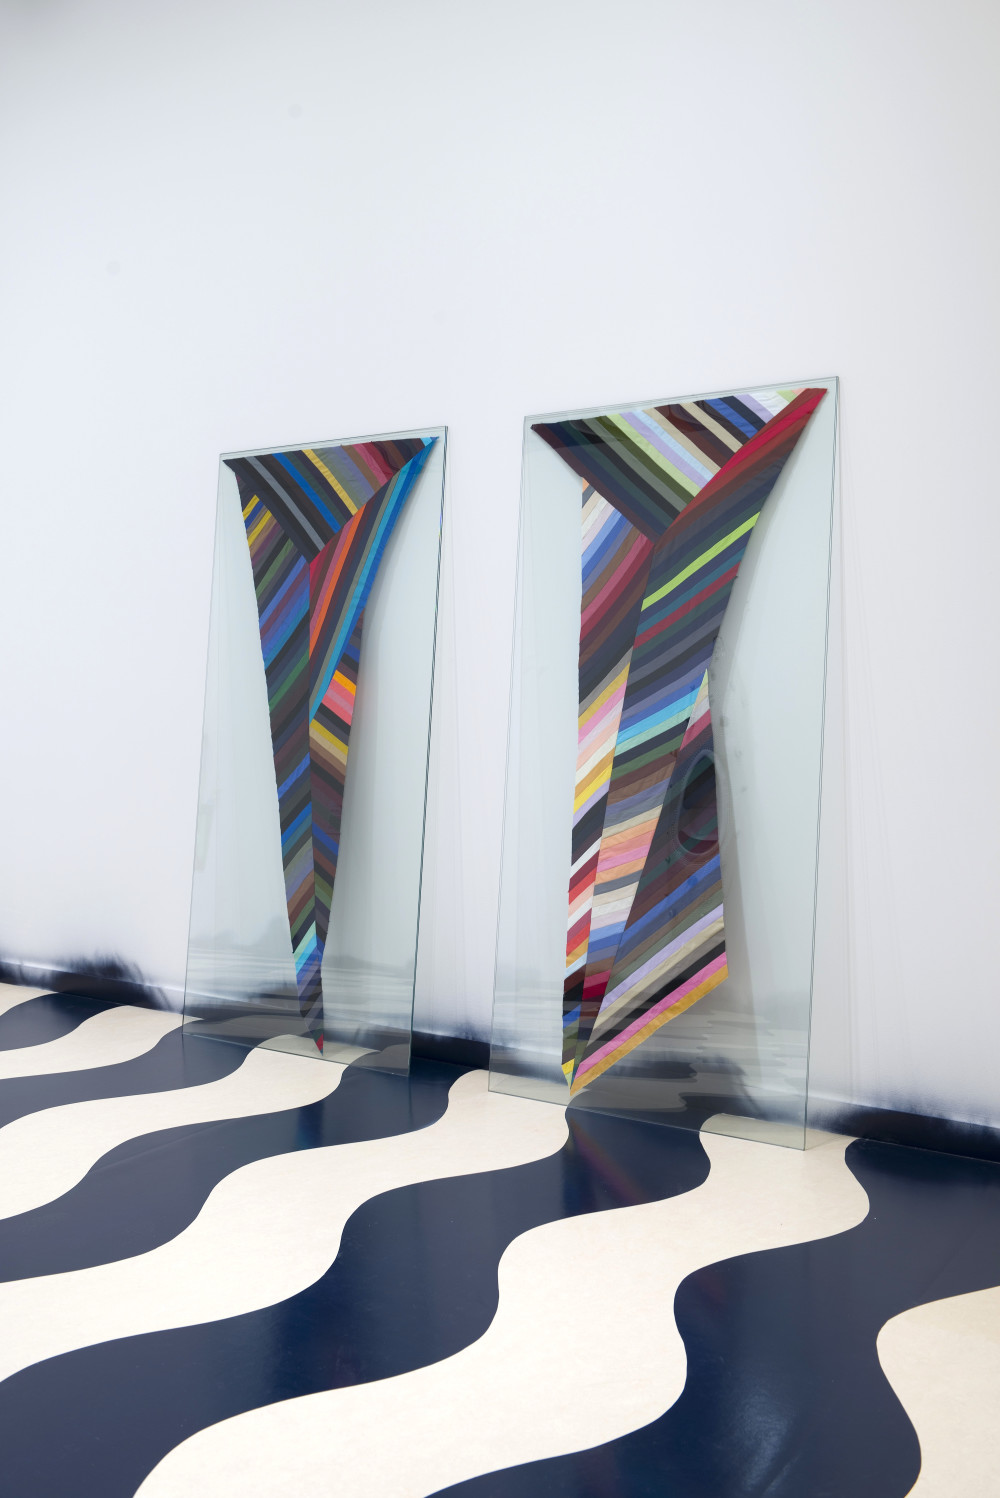 Two tall, vertical glass panes lean side by side against a white gallery wall. The floor below them is covered in a black and white wavy pattern. The glass panes have two similar but slightly different tapered designs sandwiched in between them, which are made up of thin strips of colour ranging from light pastel to dark blacks, including green, red, blue, purples, oranges, grey, and white in multiple shades. The strips are disjointed and formed trapezoid patterns within the design. The overall tapered effect in each of them is V-shaped. 